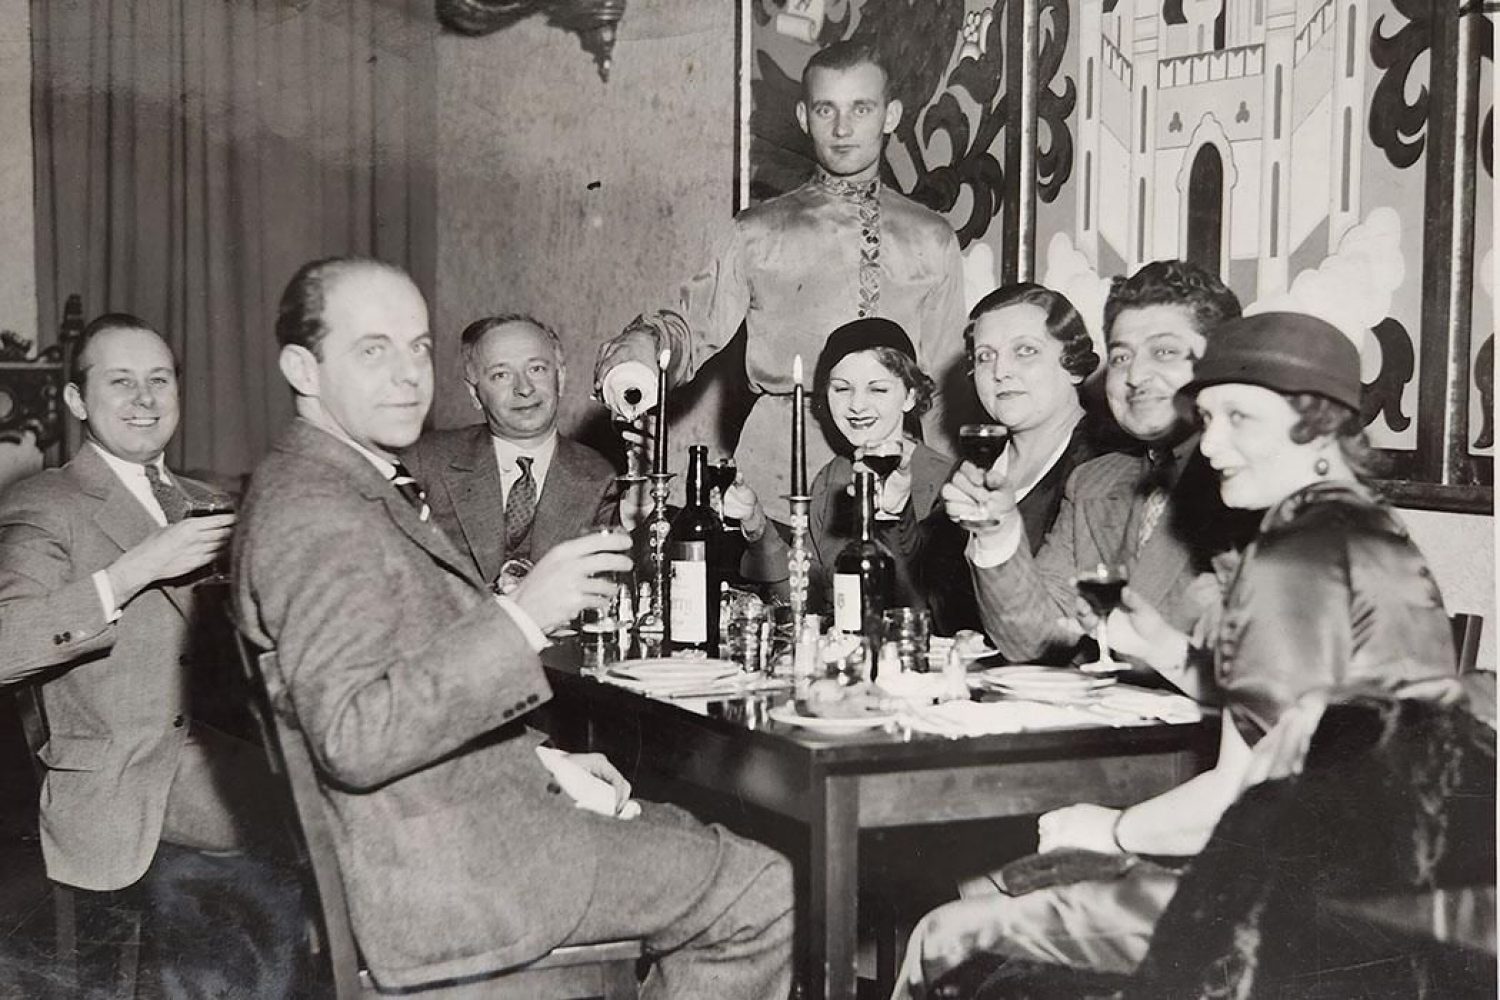 A historical photo showing a group of adults dining in a restaurant